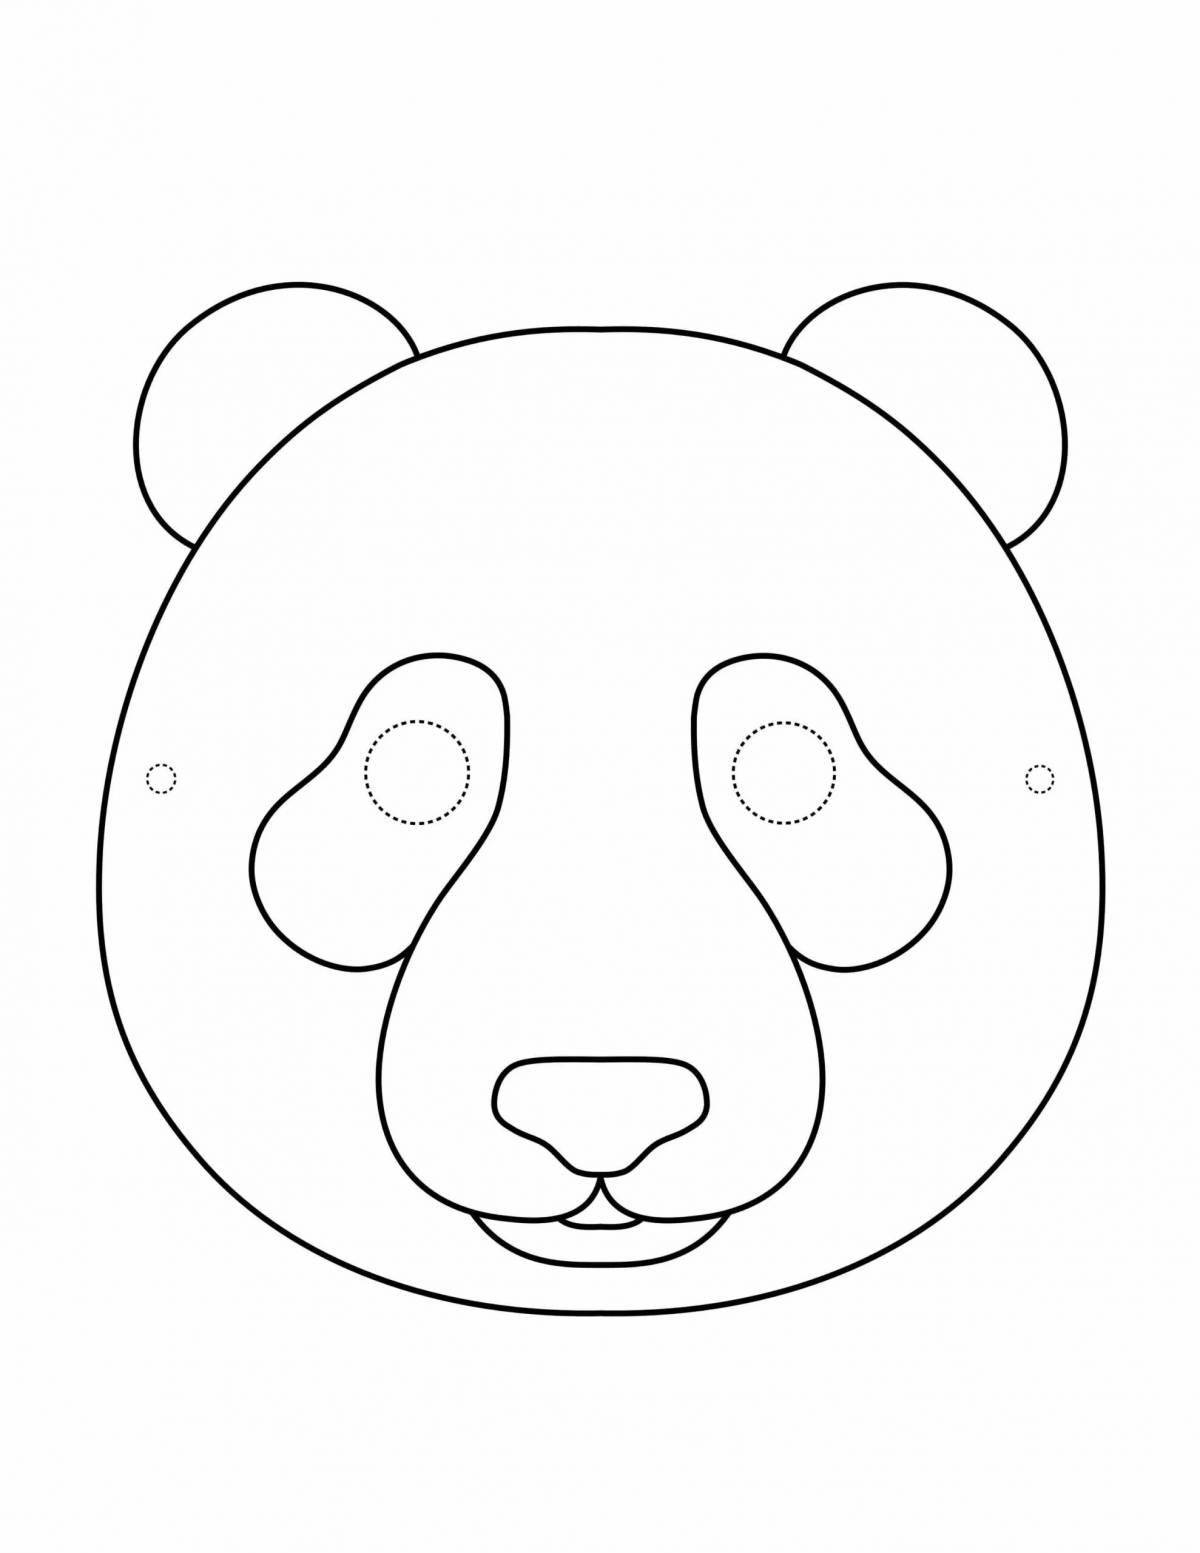 Adorable bear mask coloring page